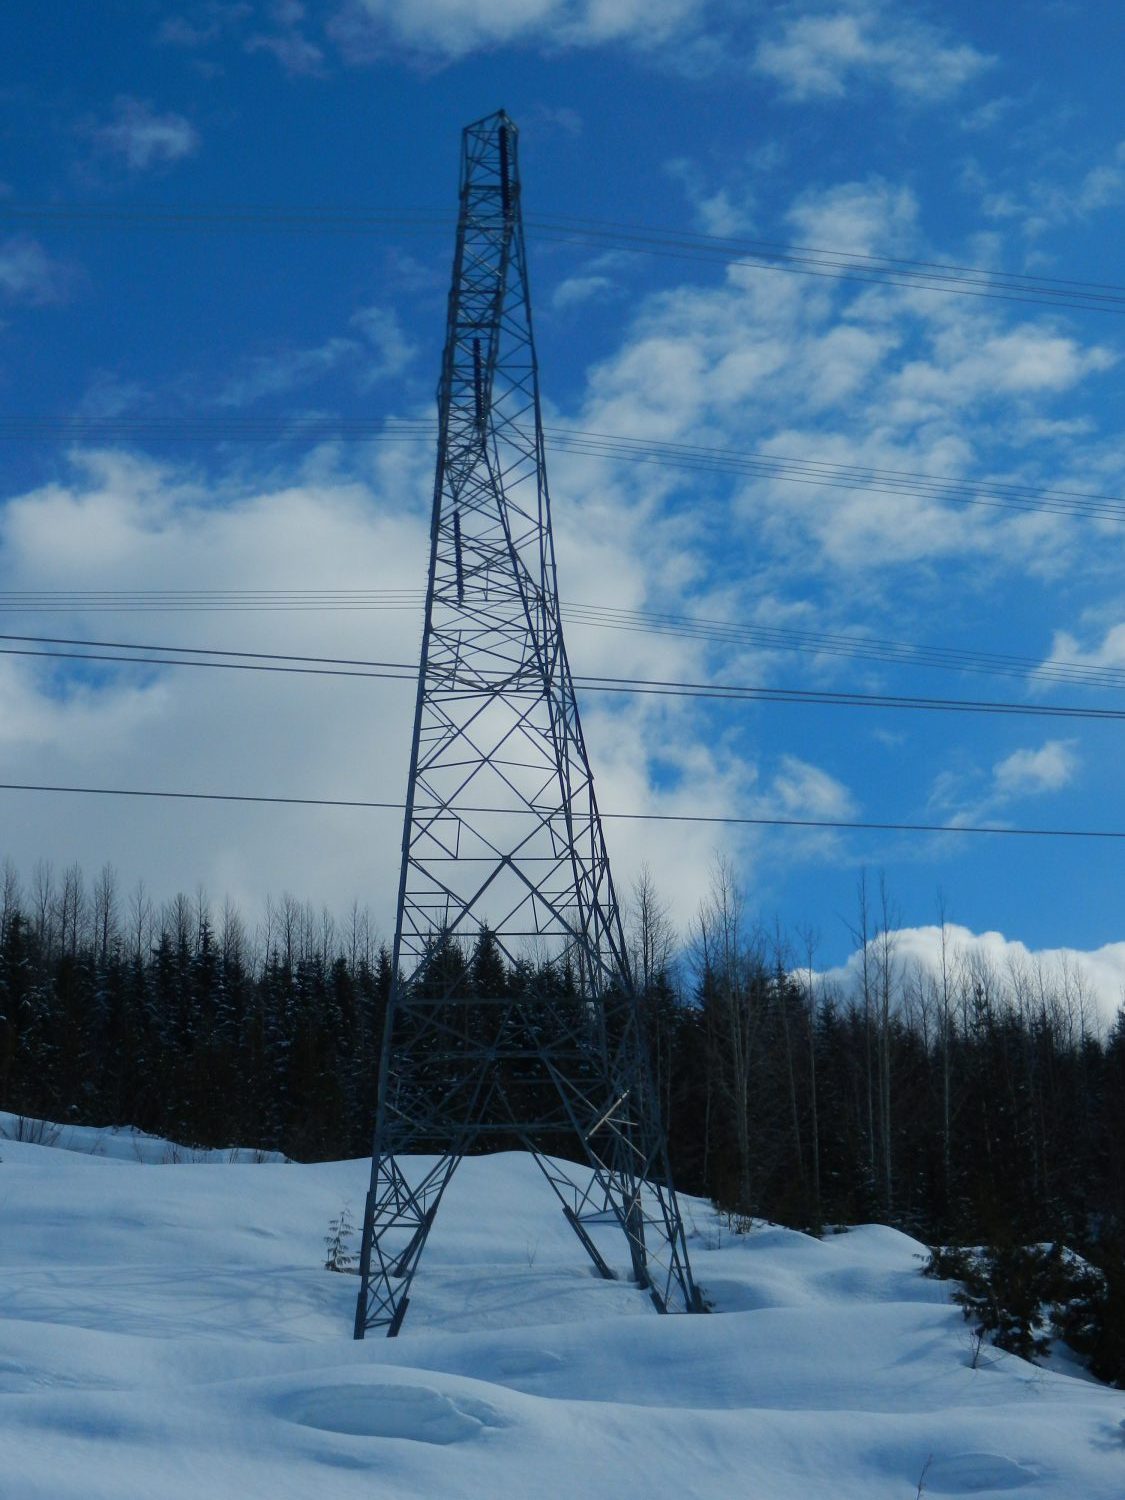 BC Hydro Interior to Lower Mainland Transmission Line: Avalanche Risk Assessment and Snow Creep and Glide Loads on Structures